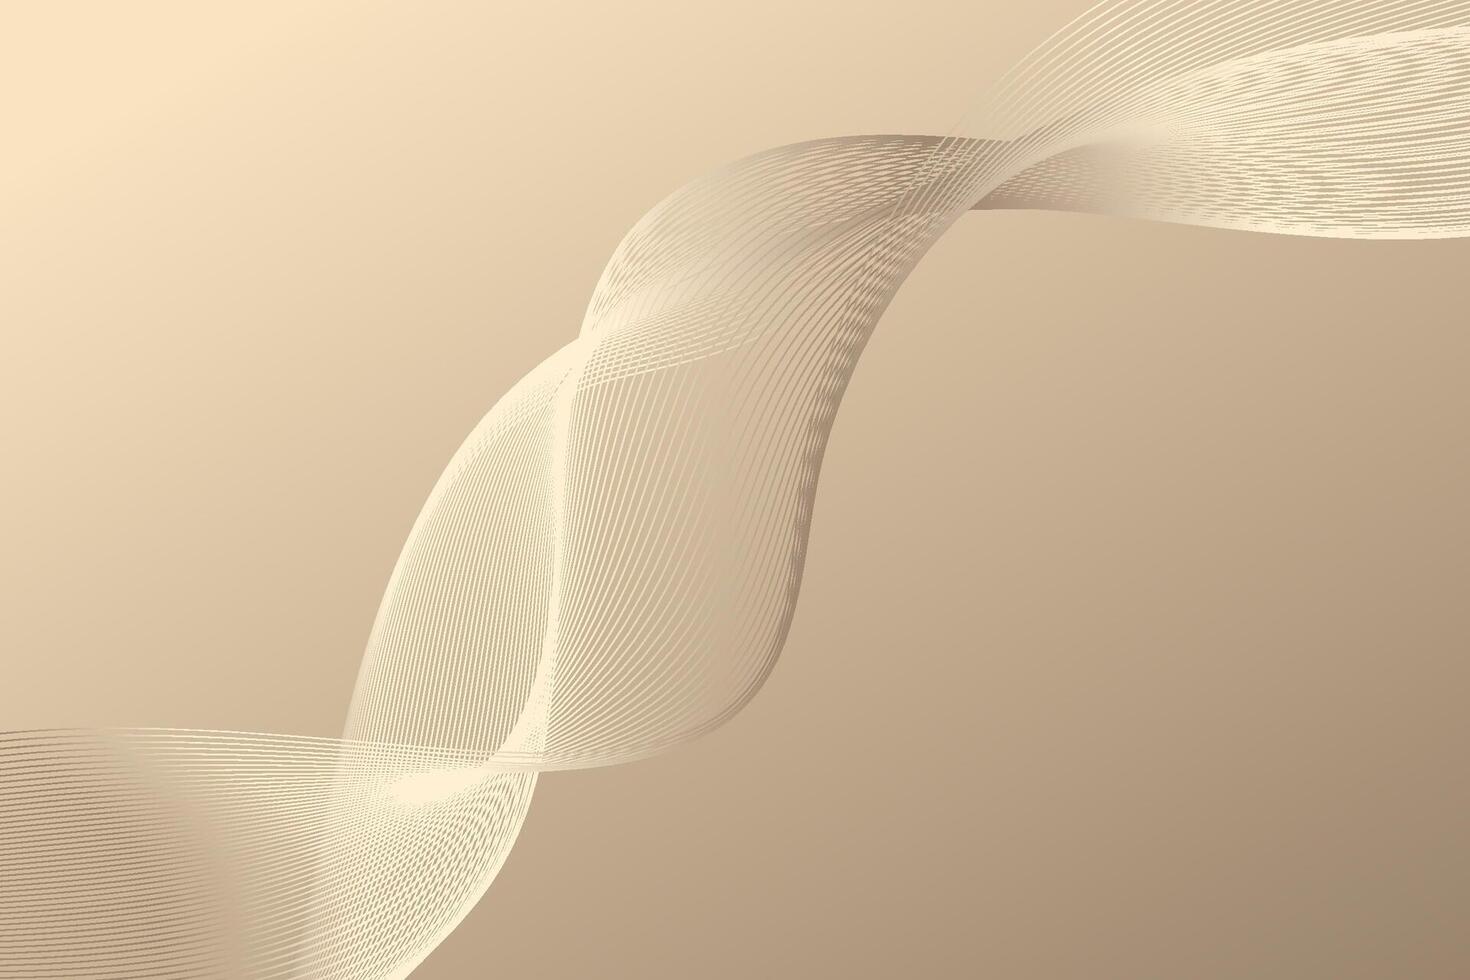 Abstract vector background with a luxury golden wave, smooth and curved with a shiny grid-like glow